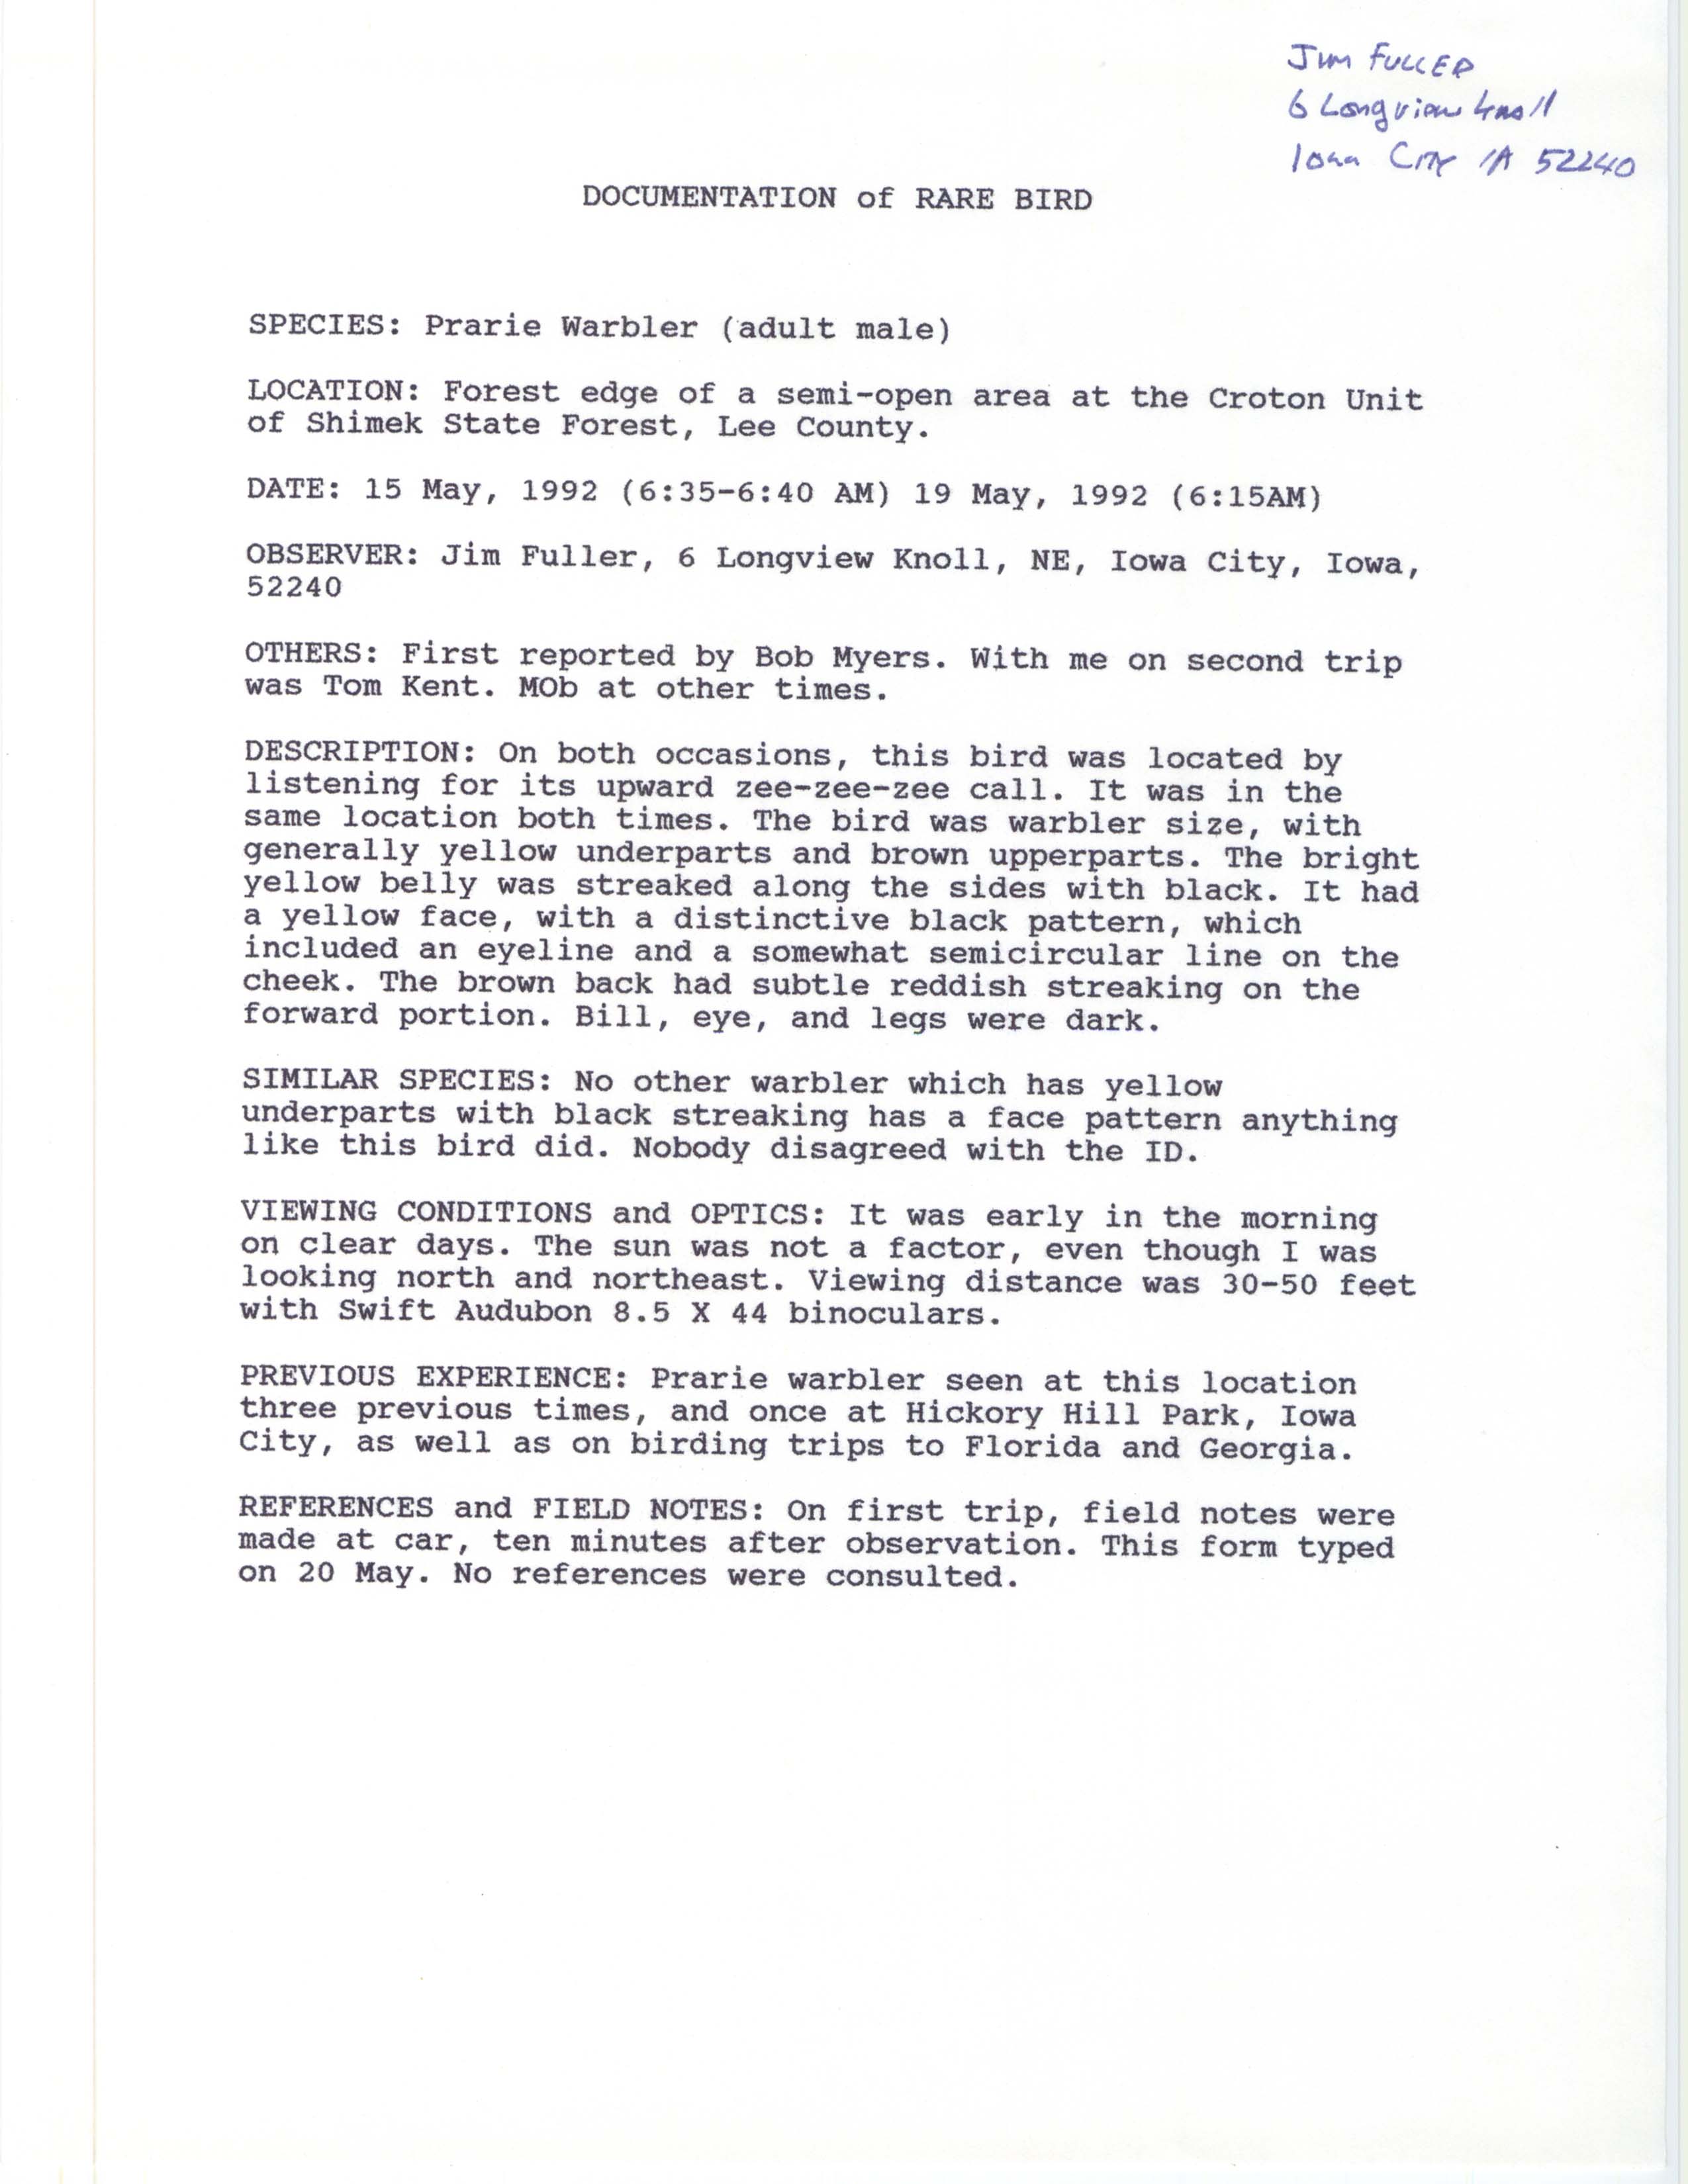 Rare bird documentation form for Prairie Warbler at the Croton Unit in Shimek State Forest, 1992